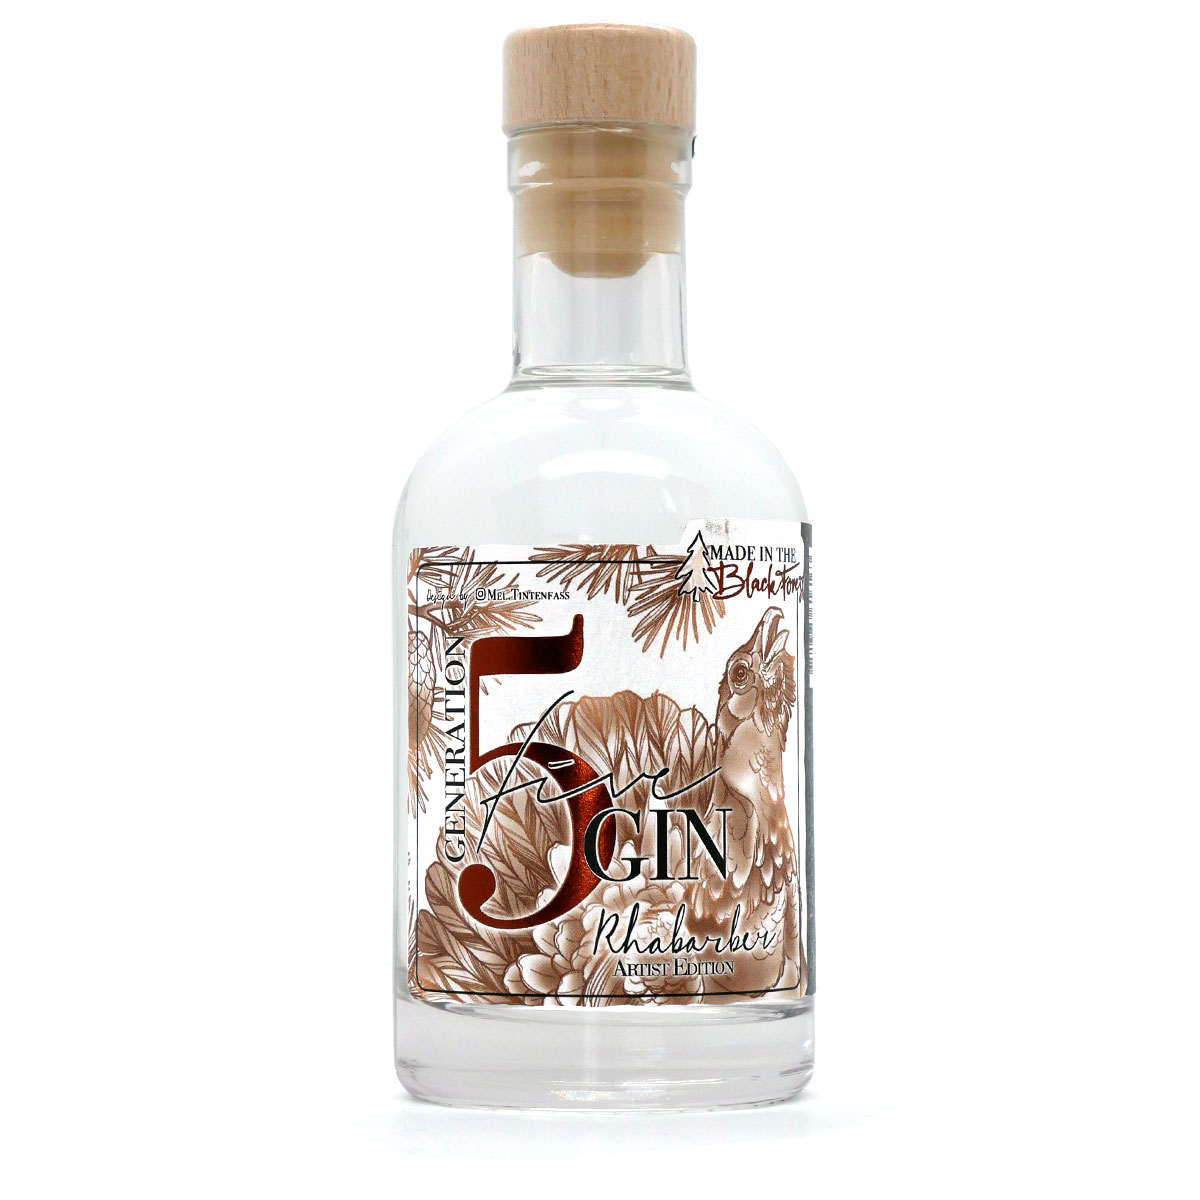 The BARREL Generation Gin - Forest Black 5 Gin